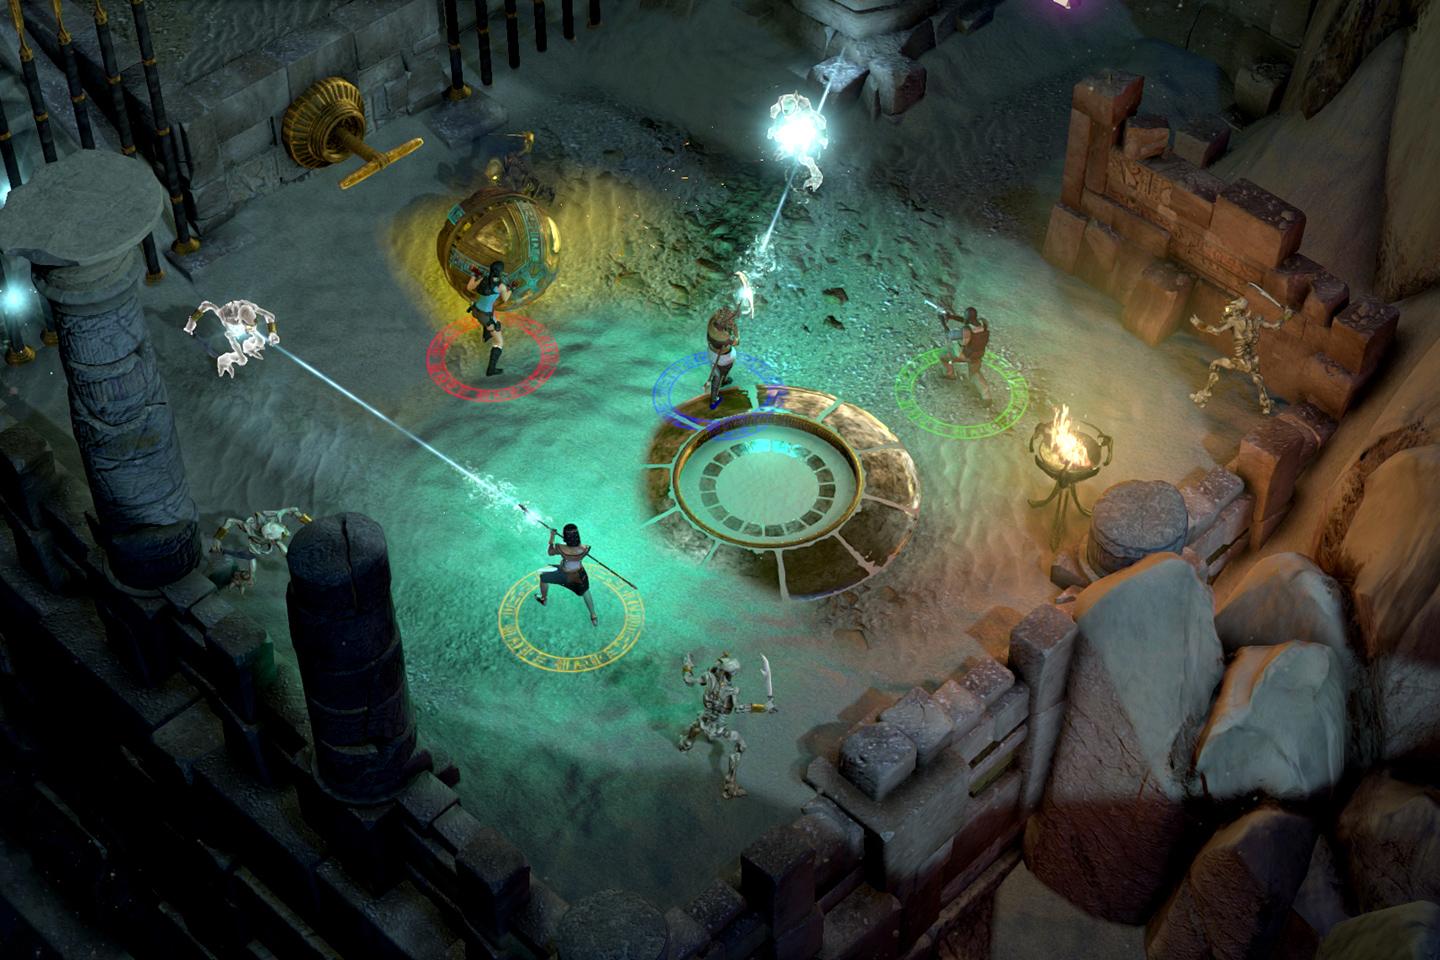 An overhead view of a Tomb Raider game scene with characters engaged in combat on a circular ancient platform, surrounded by mystical symbols and magical effects.